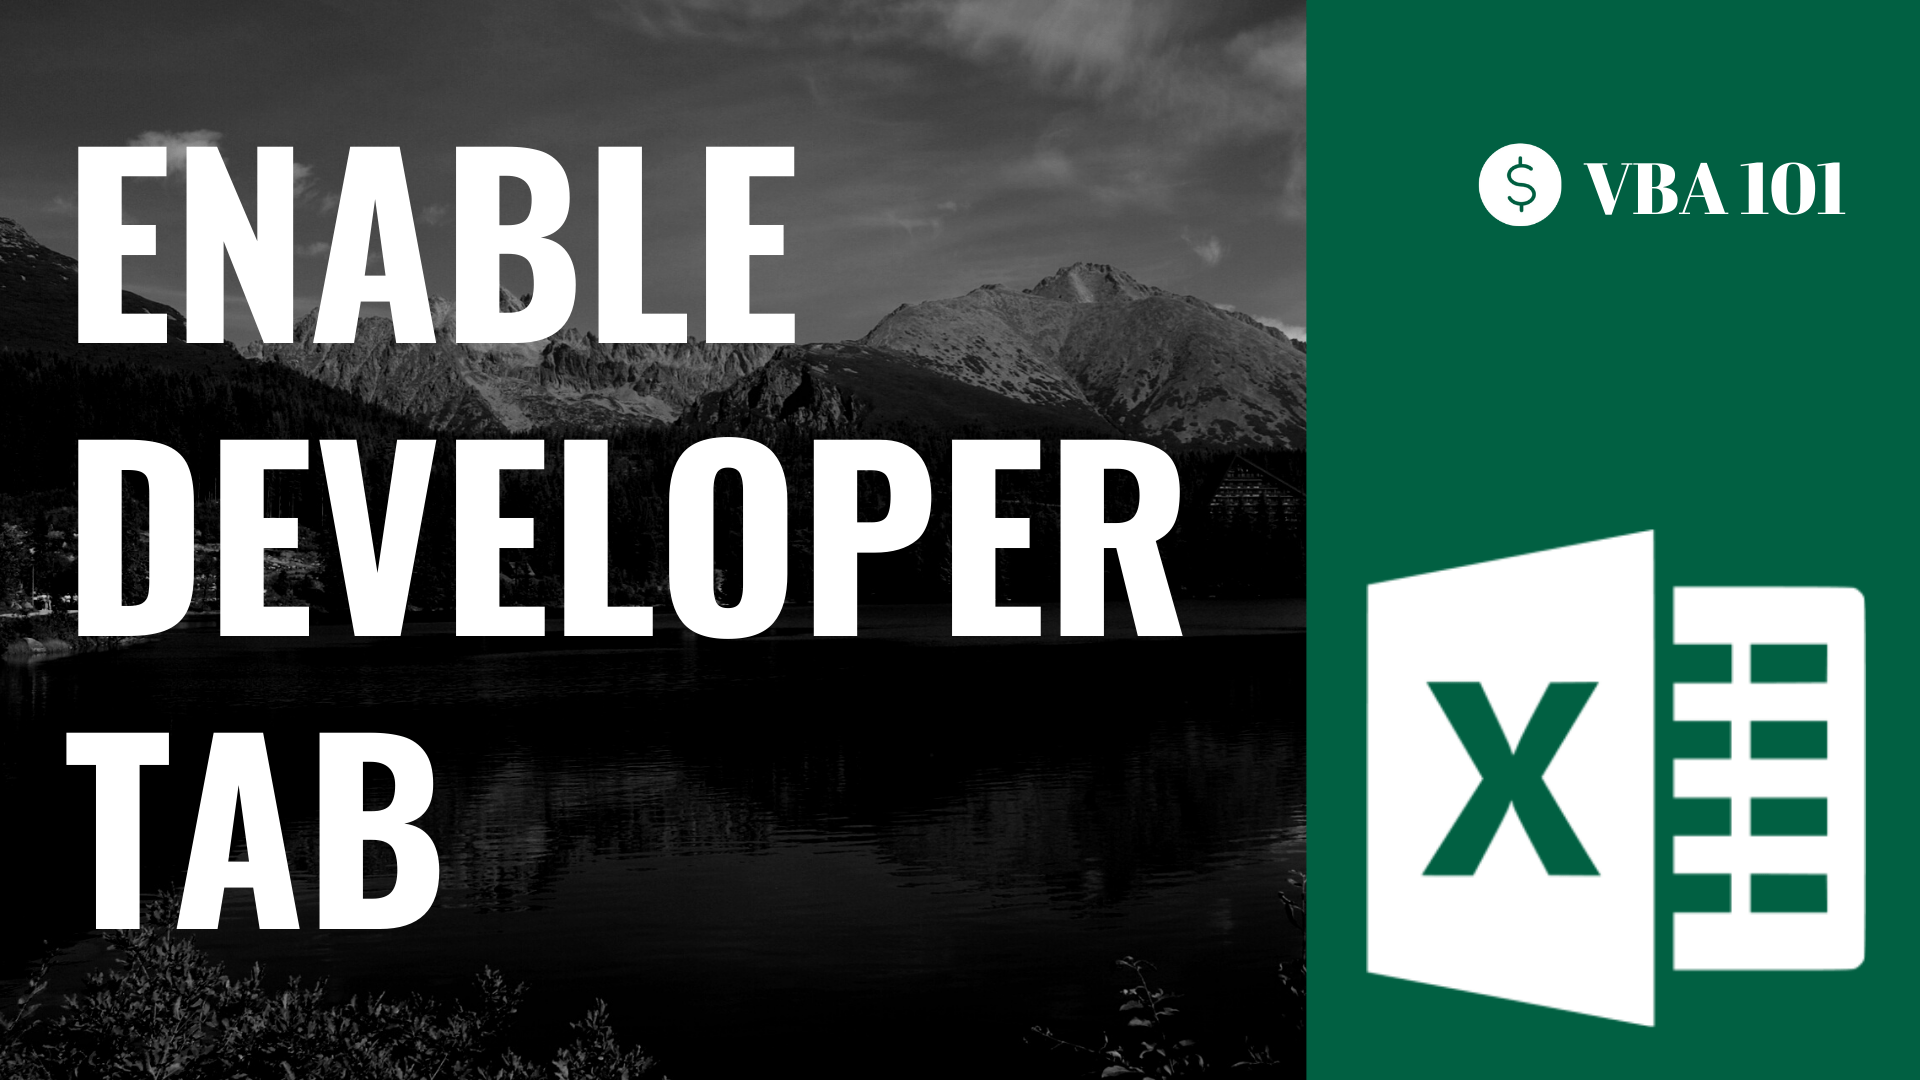 how to turn on developer tab in excel